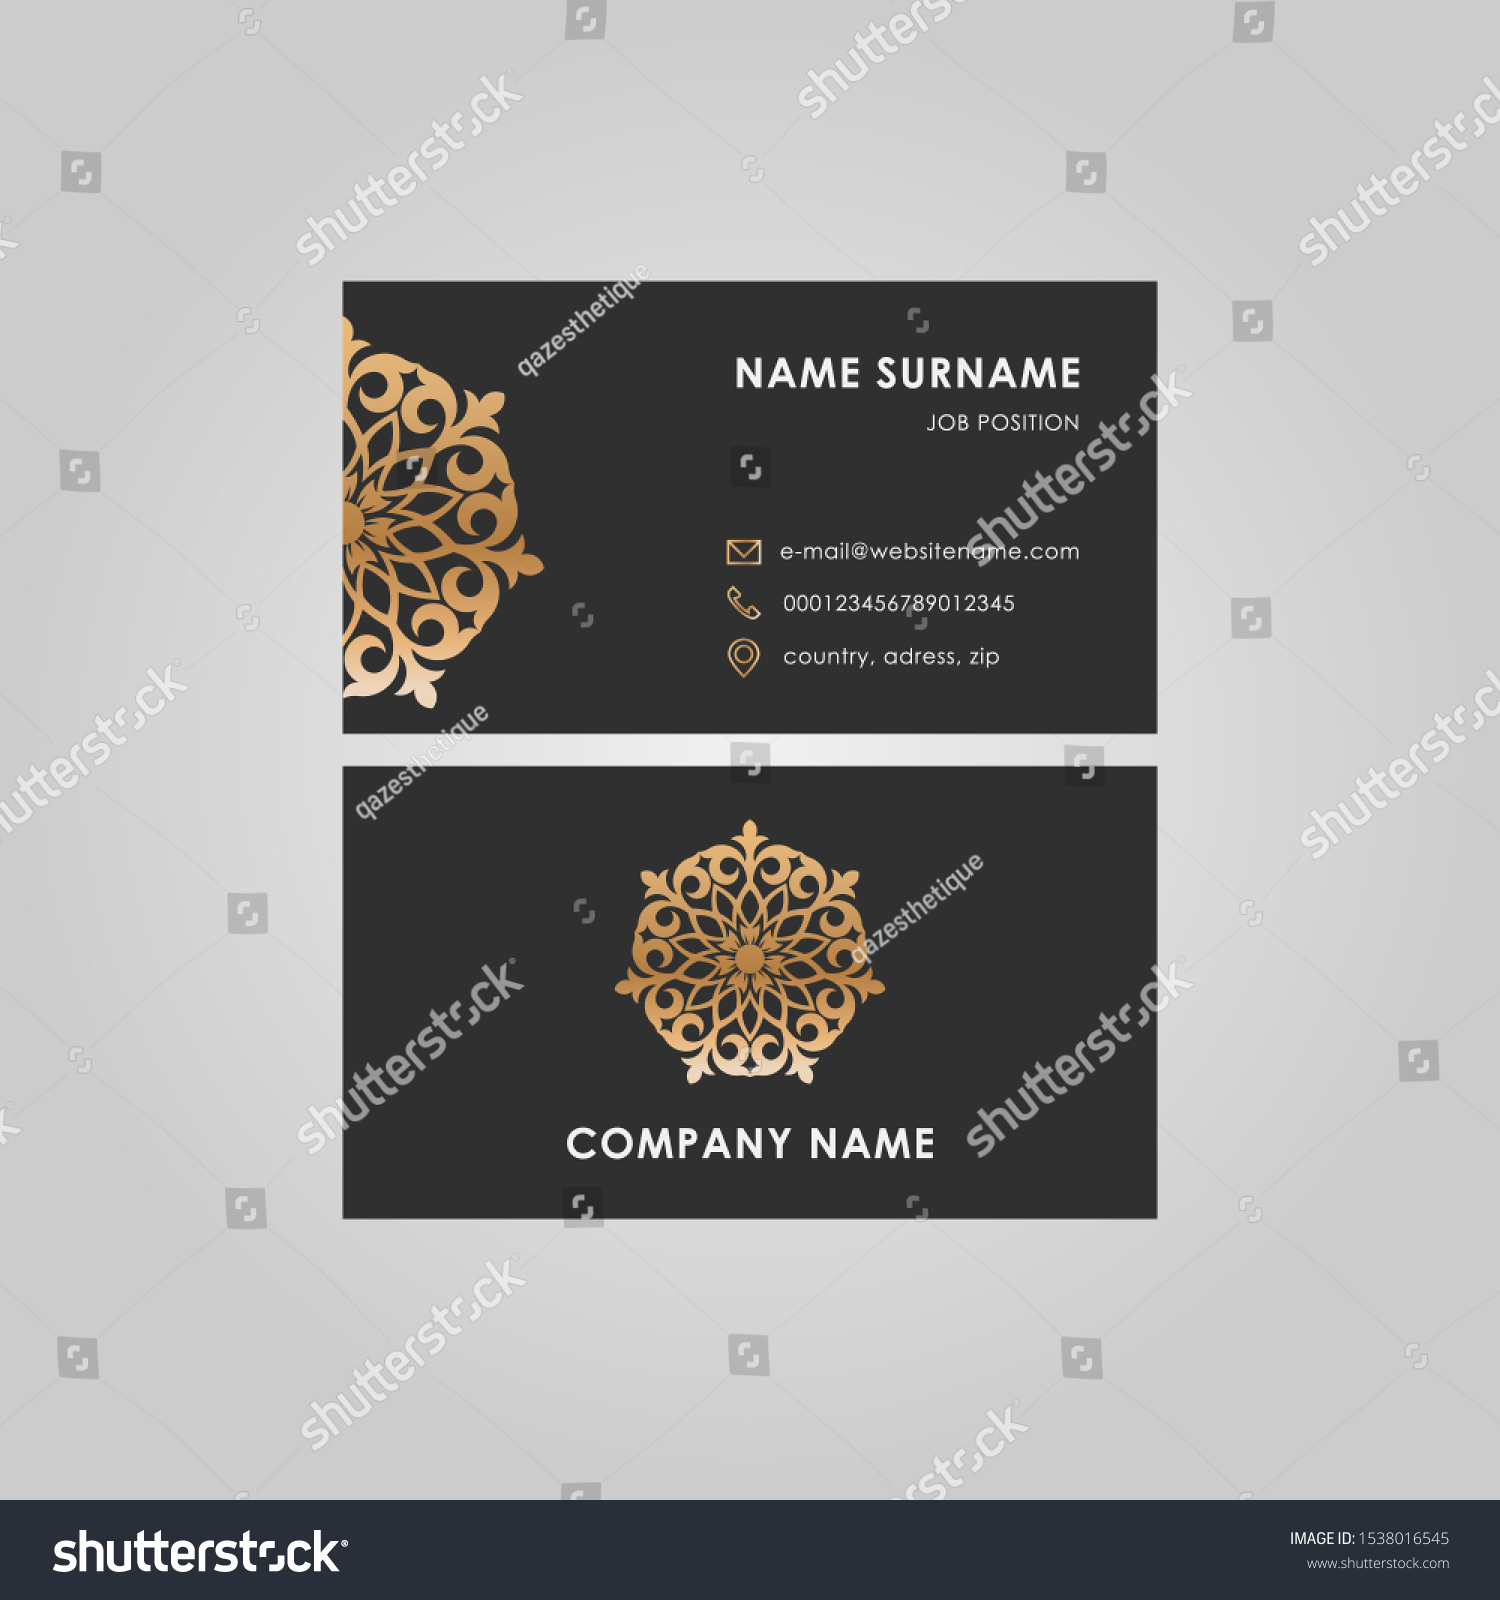 SVG of Business Card in oriental style, with elements of Kazakh design. svg